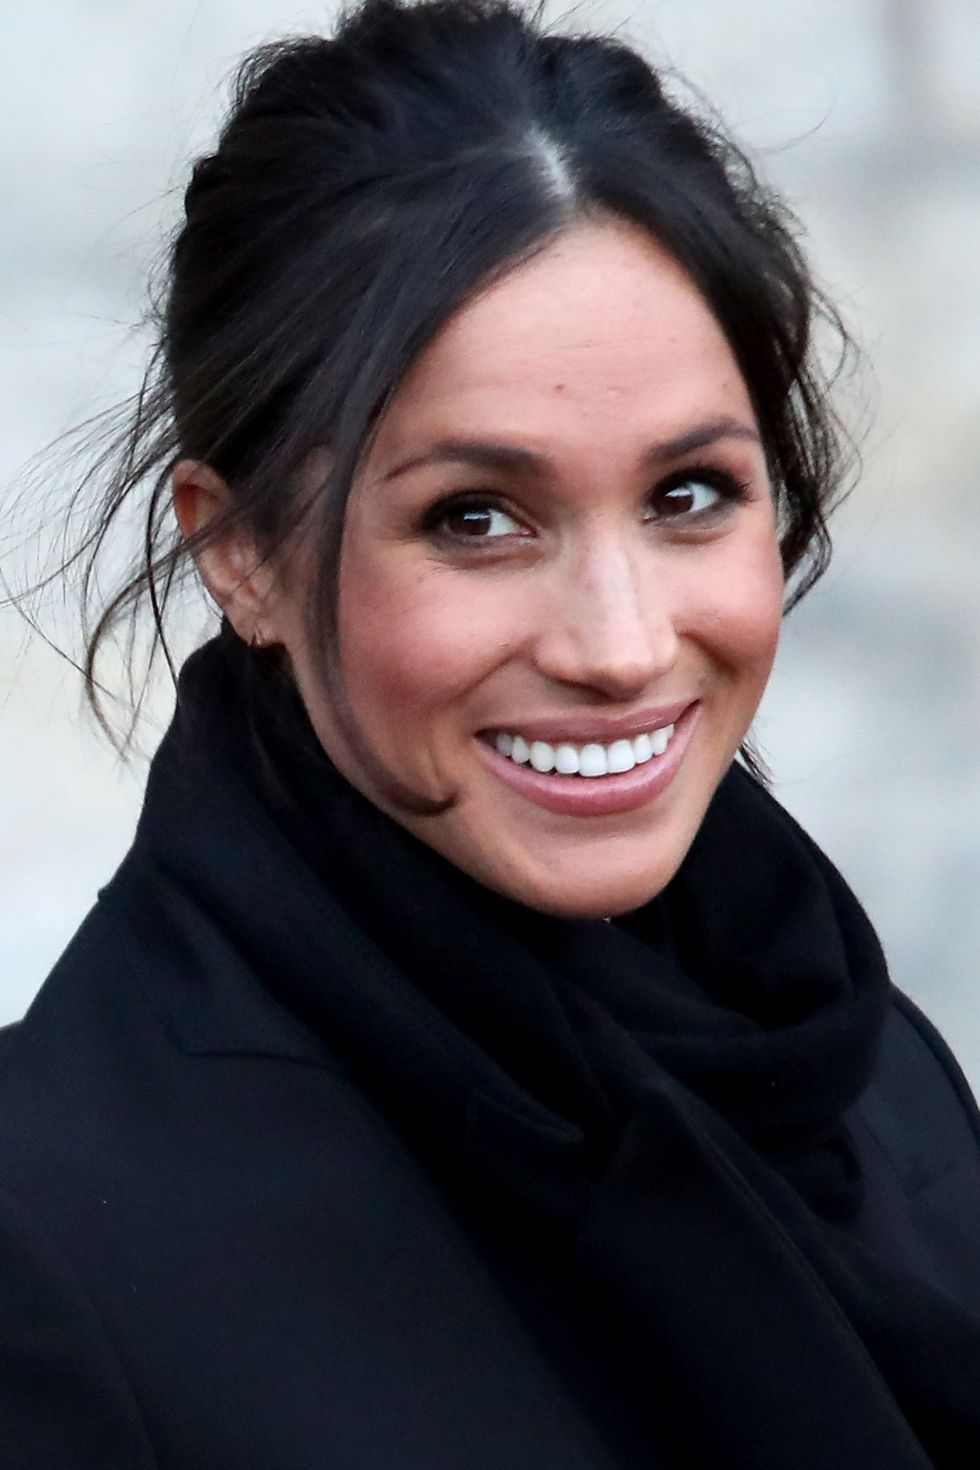 Meghan Markle - Duchess of Sussex